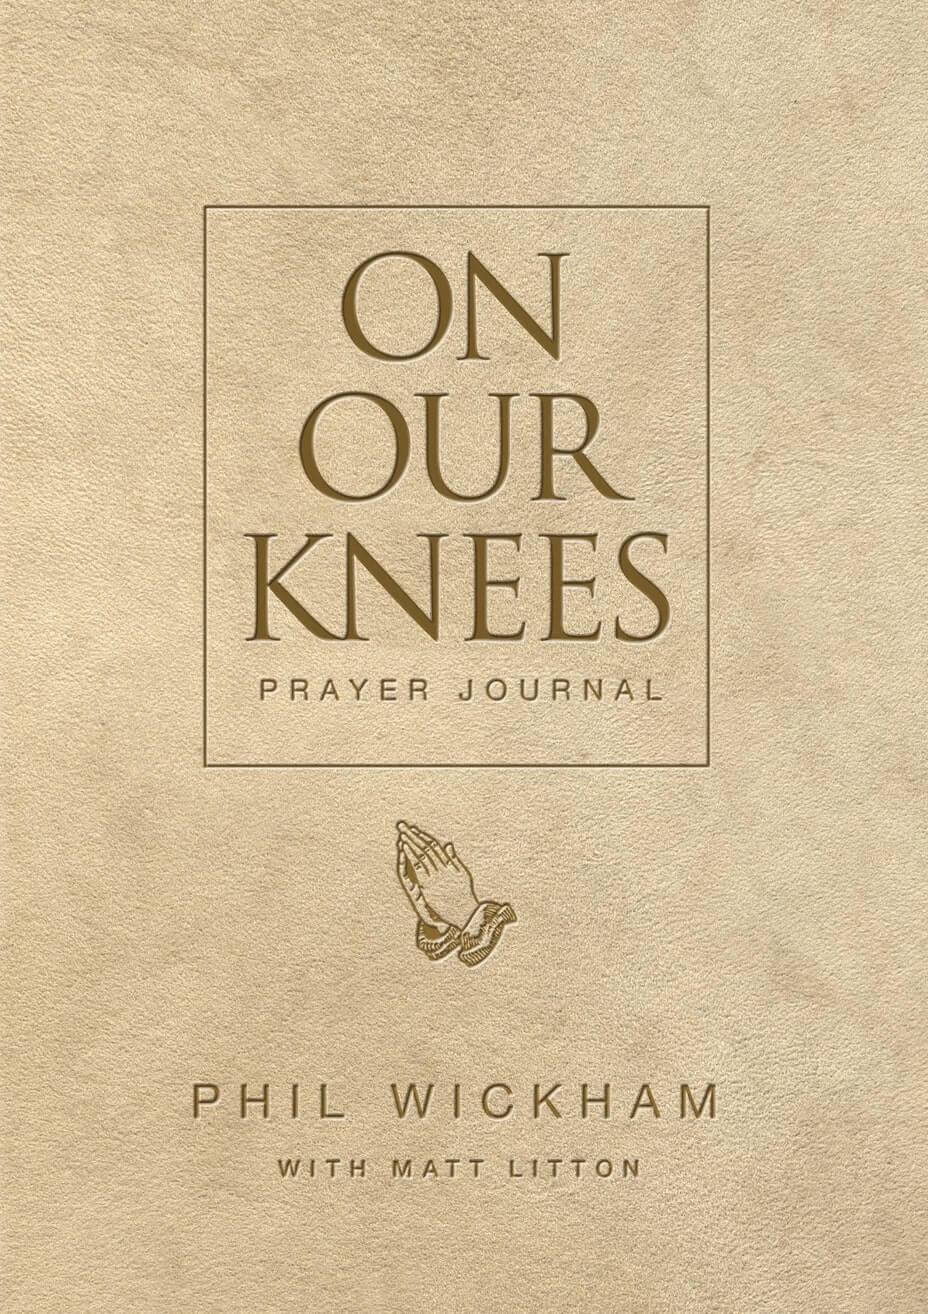 Cover of the book "On Our Knees Prayer Journal"